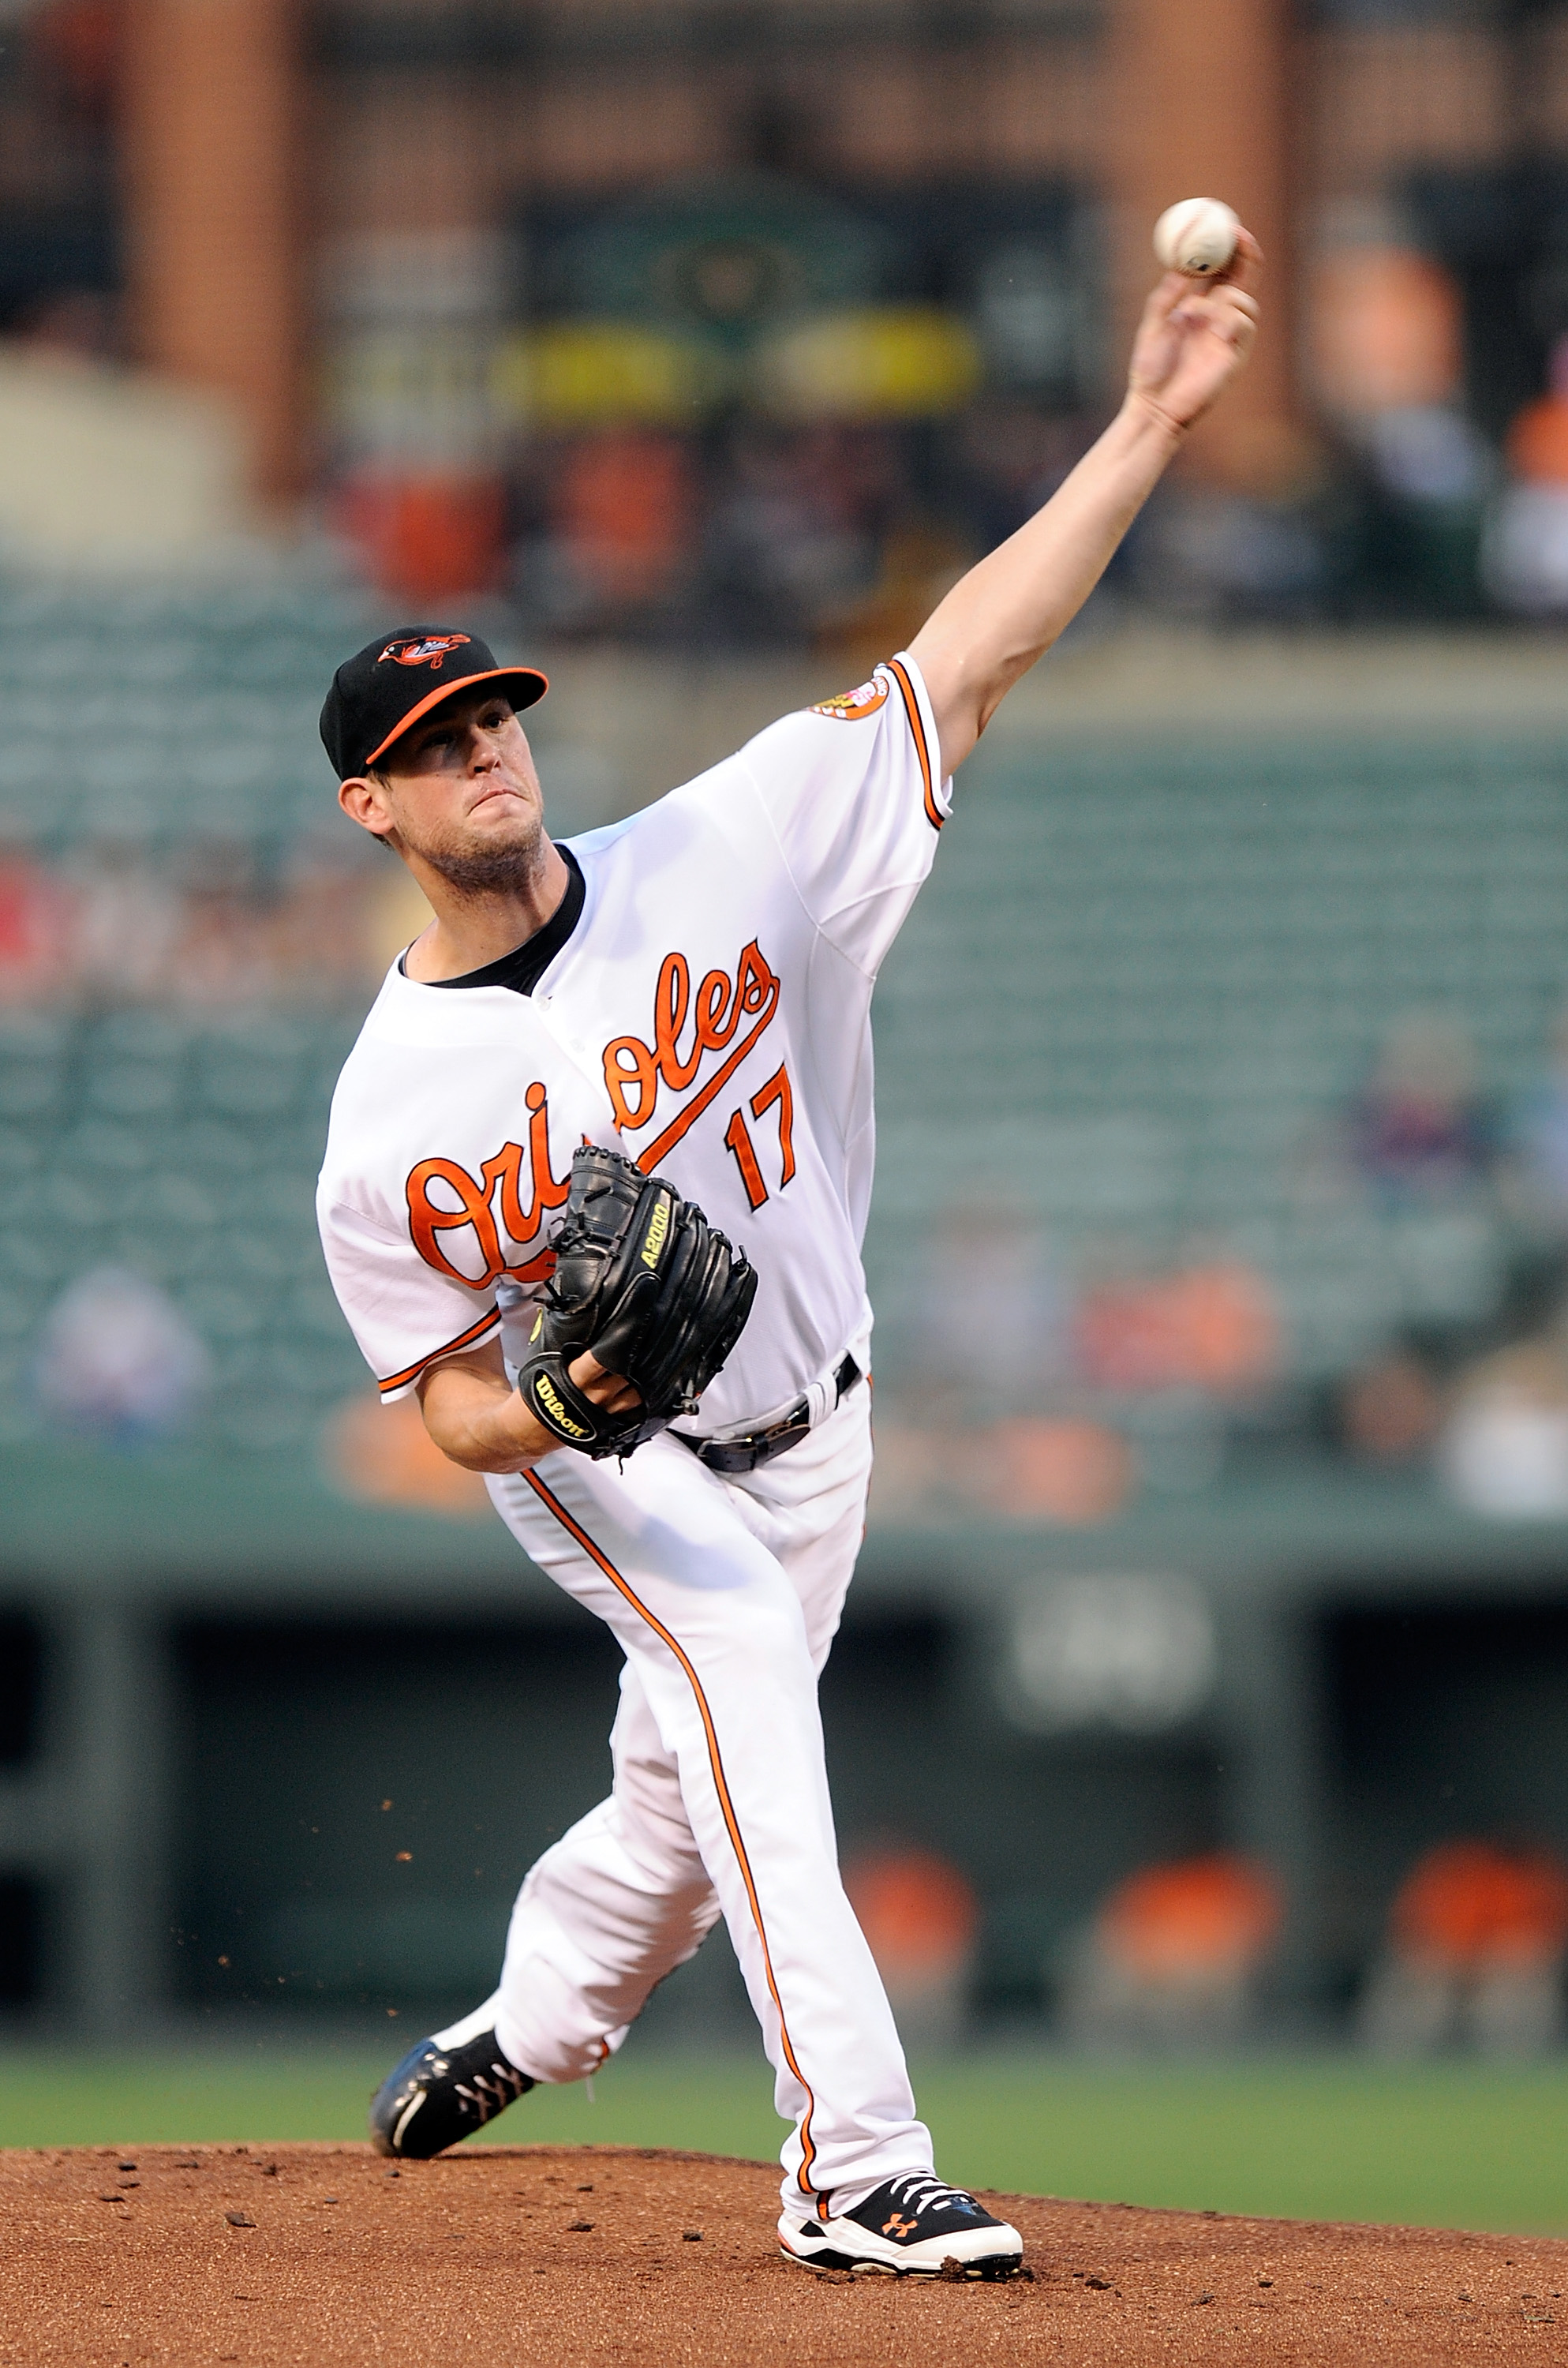 BALTIMORE - AUGUST 31:  Brian Matusz #17 of the Baltimore Orioles pitches against the Boston Red Sox at Camden Yards on August 31, 2010 in Baltimore, Maryland.  (Photo by Greg Fiume/Getty Images)